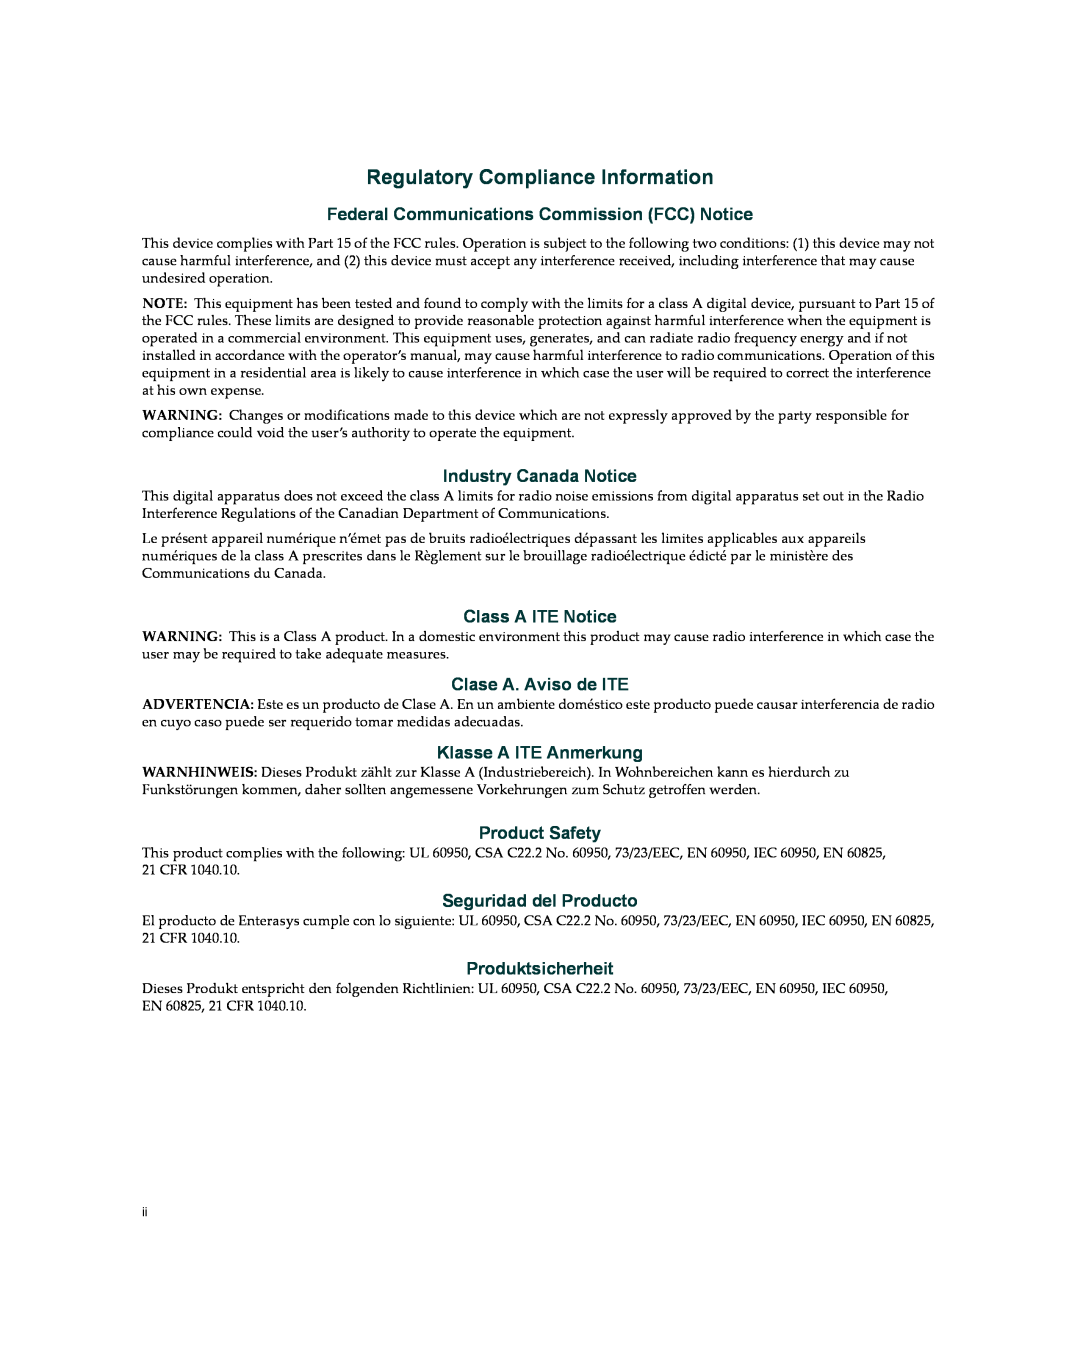 Enterasys Networks X009-U Regulatory Compliance Information, Federal Communications Commission FCC Notice, Product Safety 